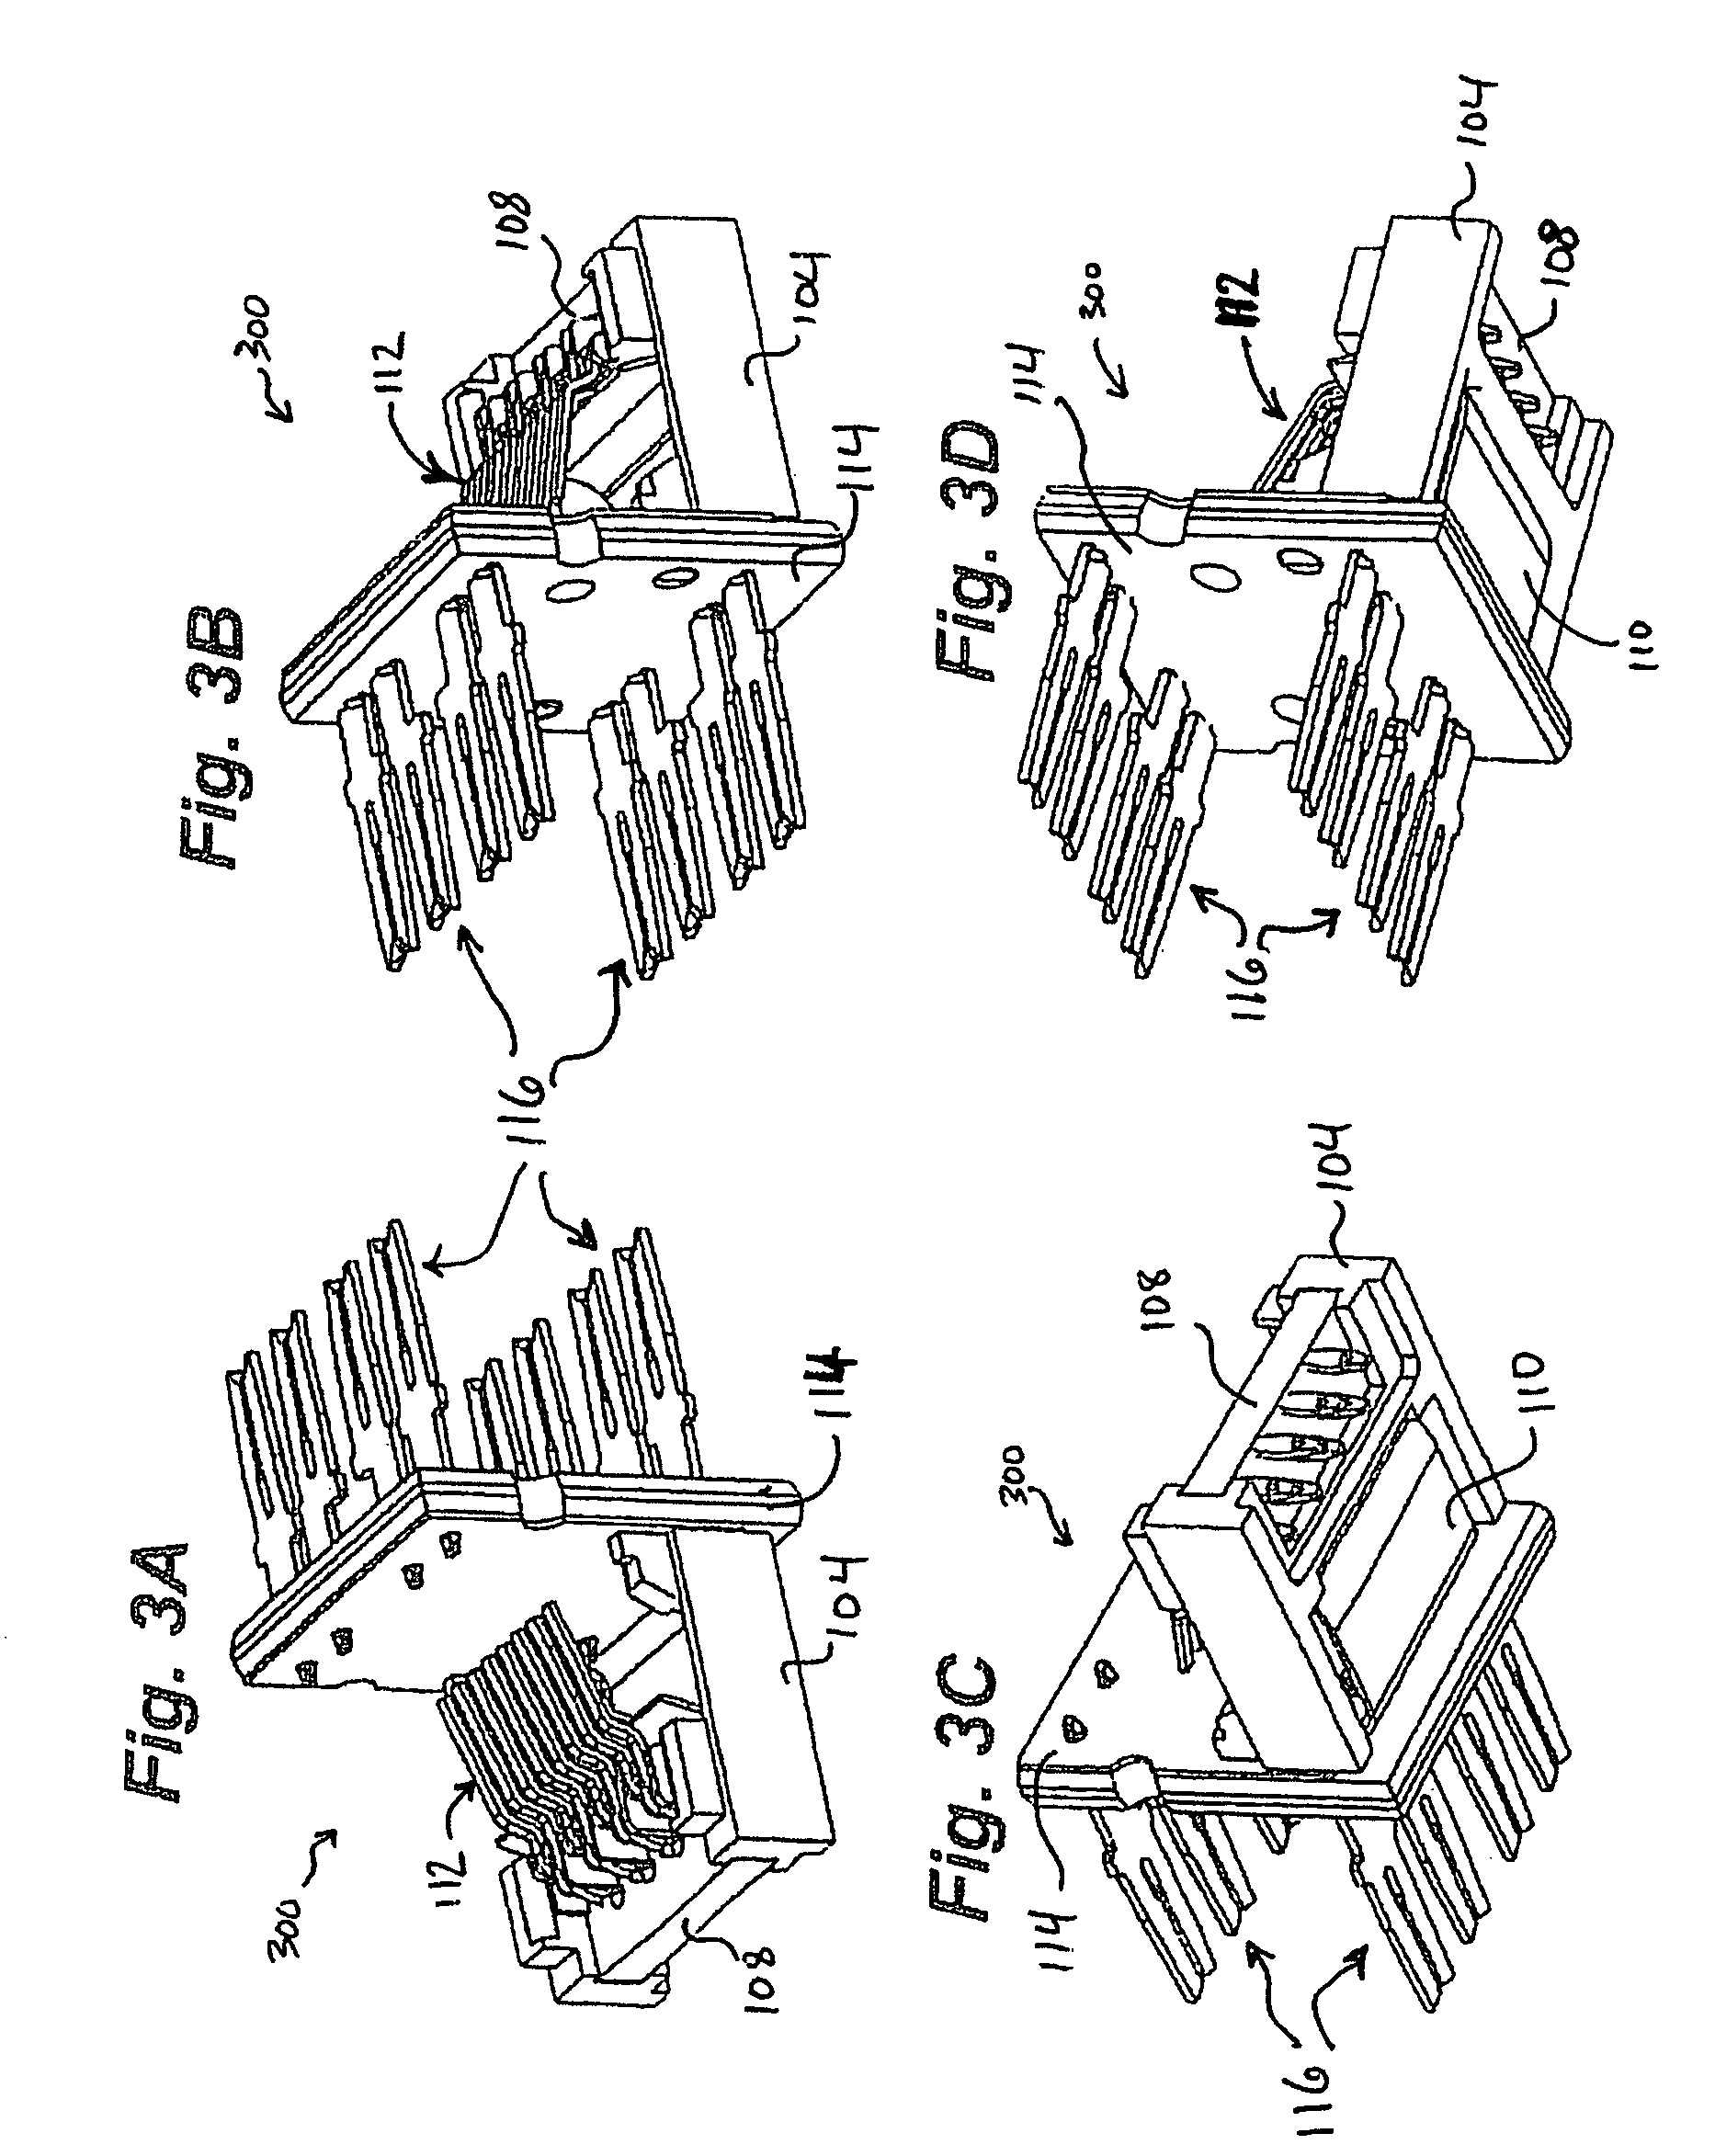 Communications connector with flexible printed circuit board